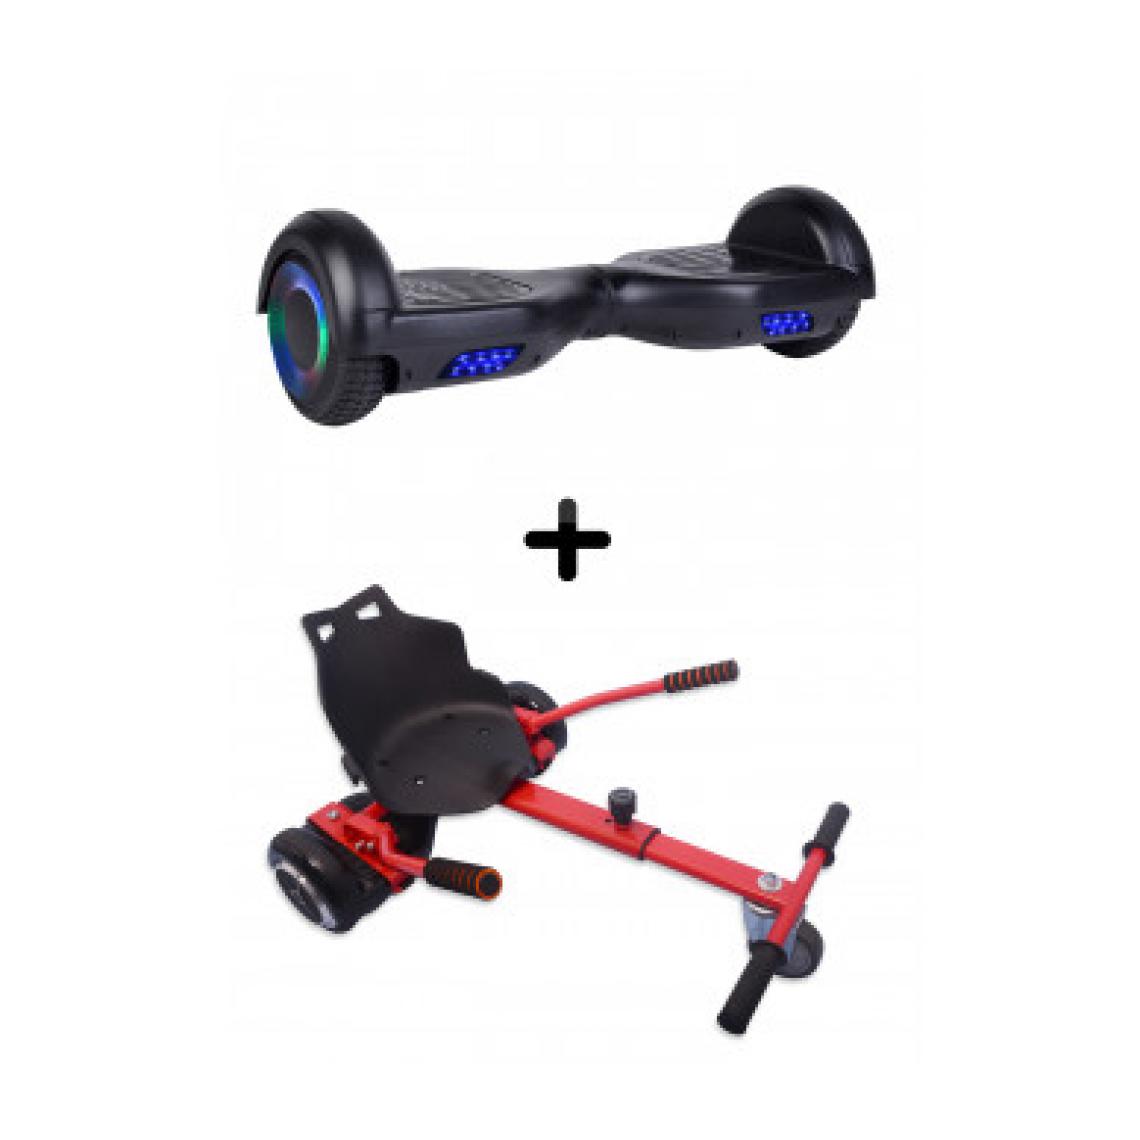 Hoverdrive - Hoverboard Prime 6.5'' V2 500W Roues Lumineuses Led Edition Noir + Kart Rouge - Gyropode